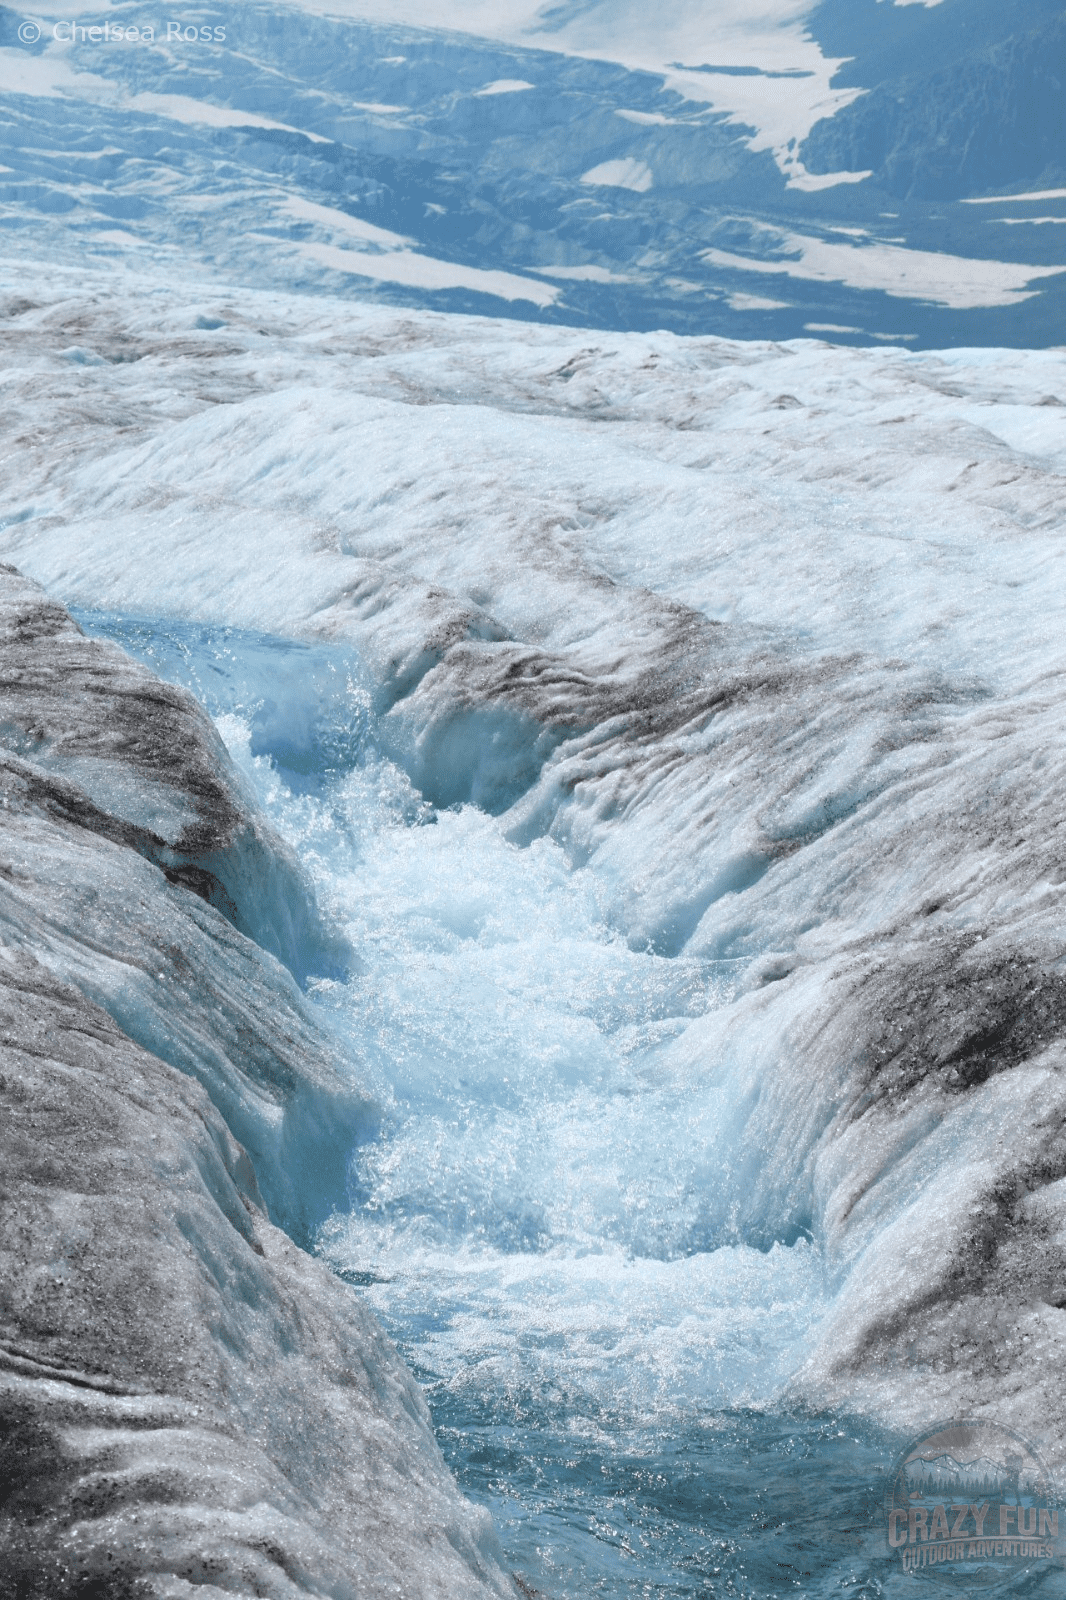 Large volume of water washing down the glacier in river form.